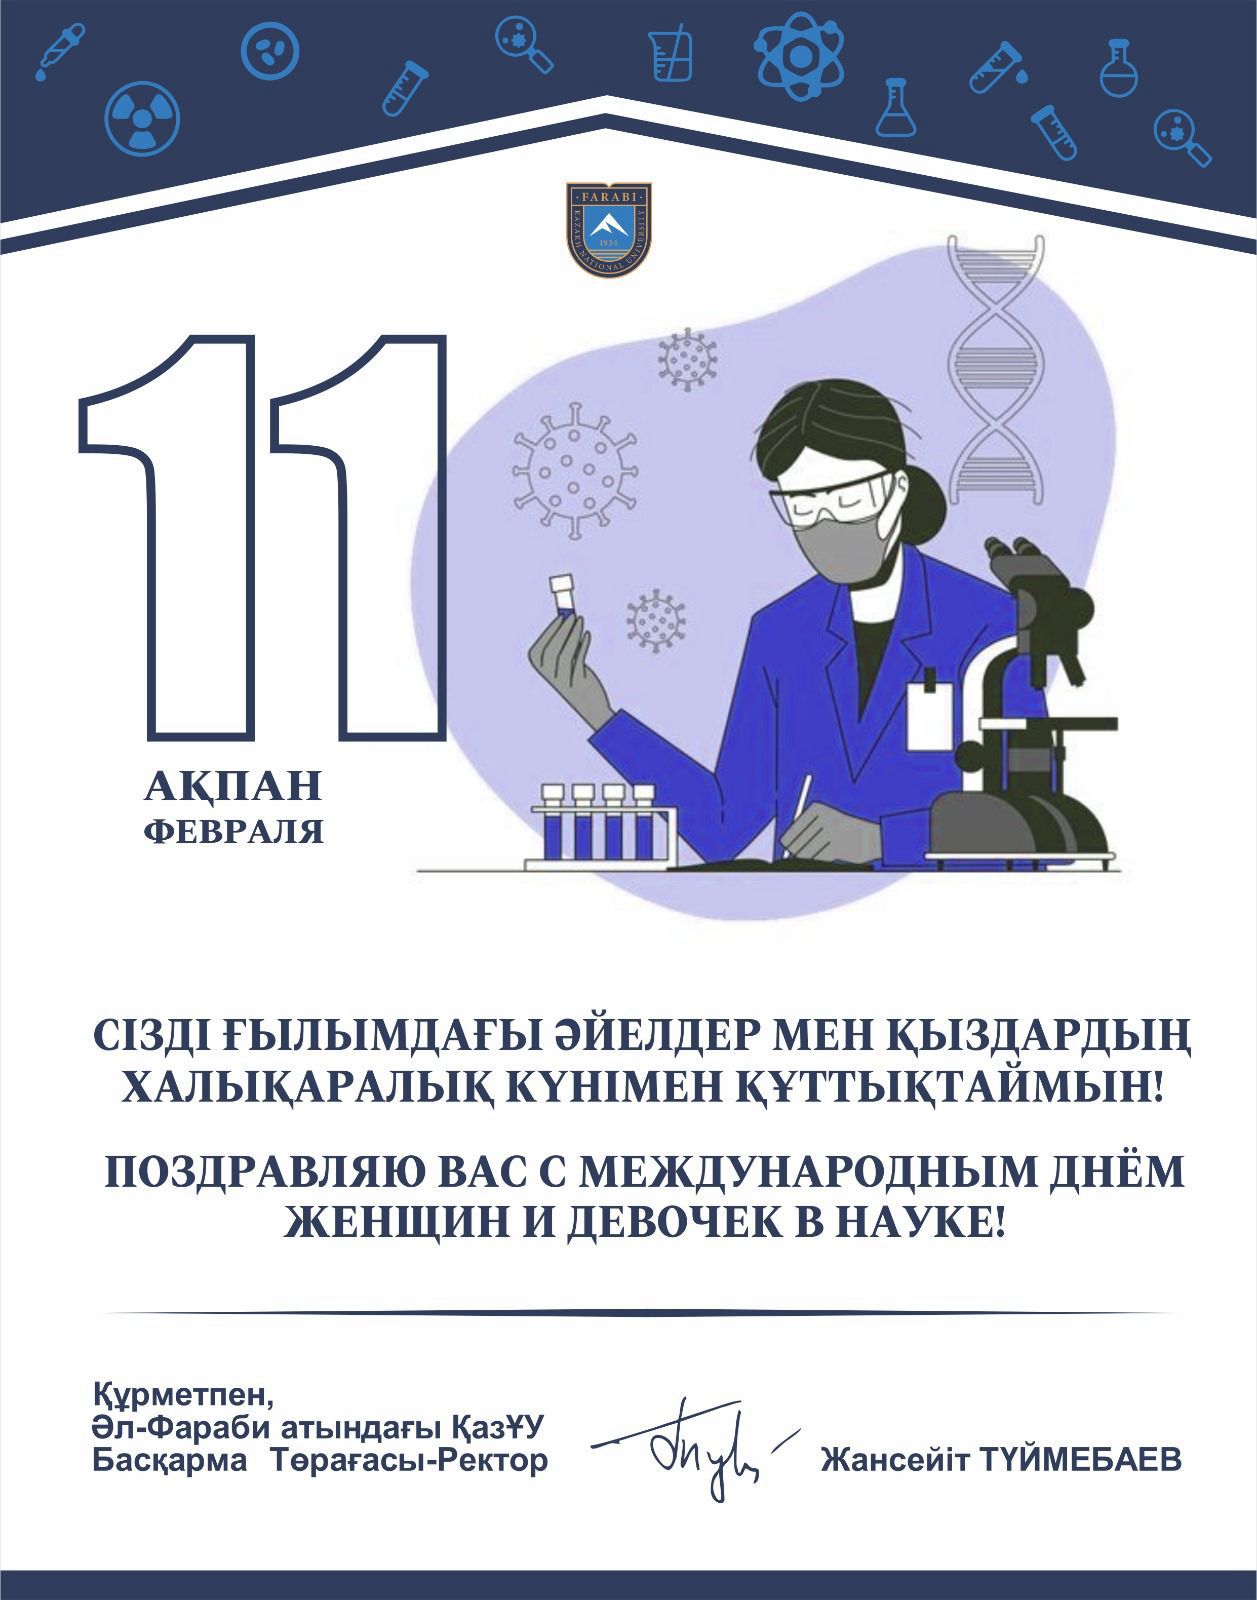 02/11/2024 This day is a great opportunity to celebrate the important contribution of women and girls to the development of science, technology and innovation.